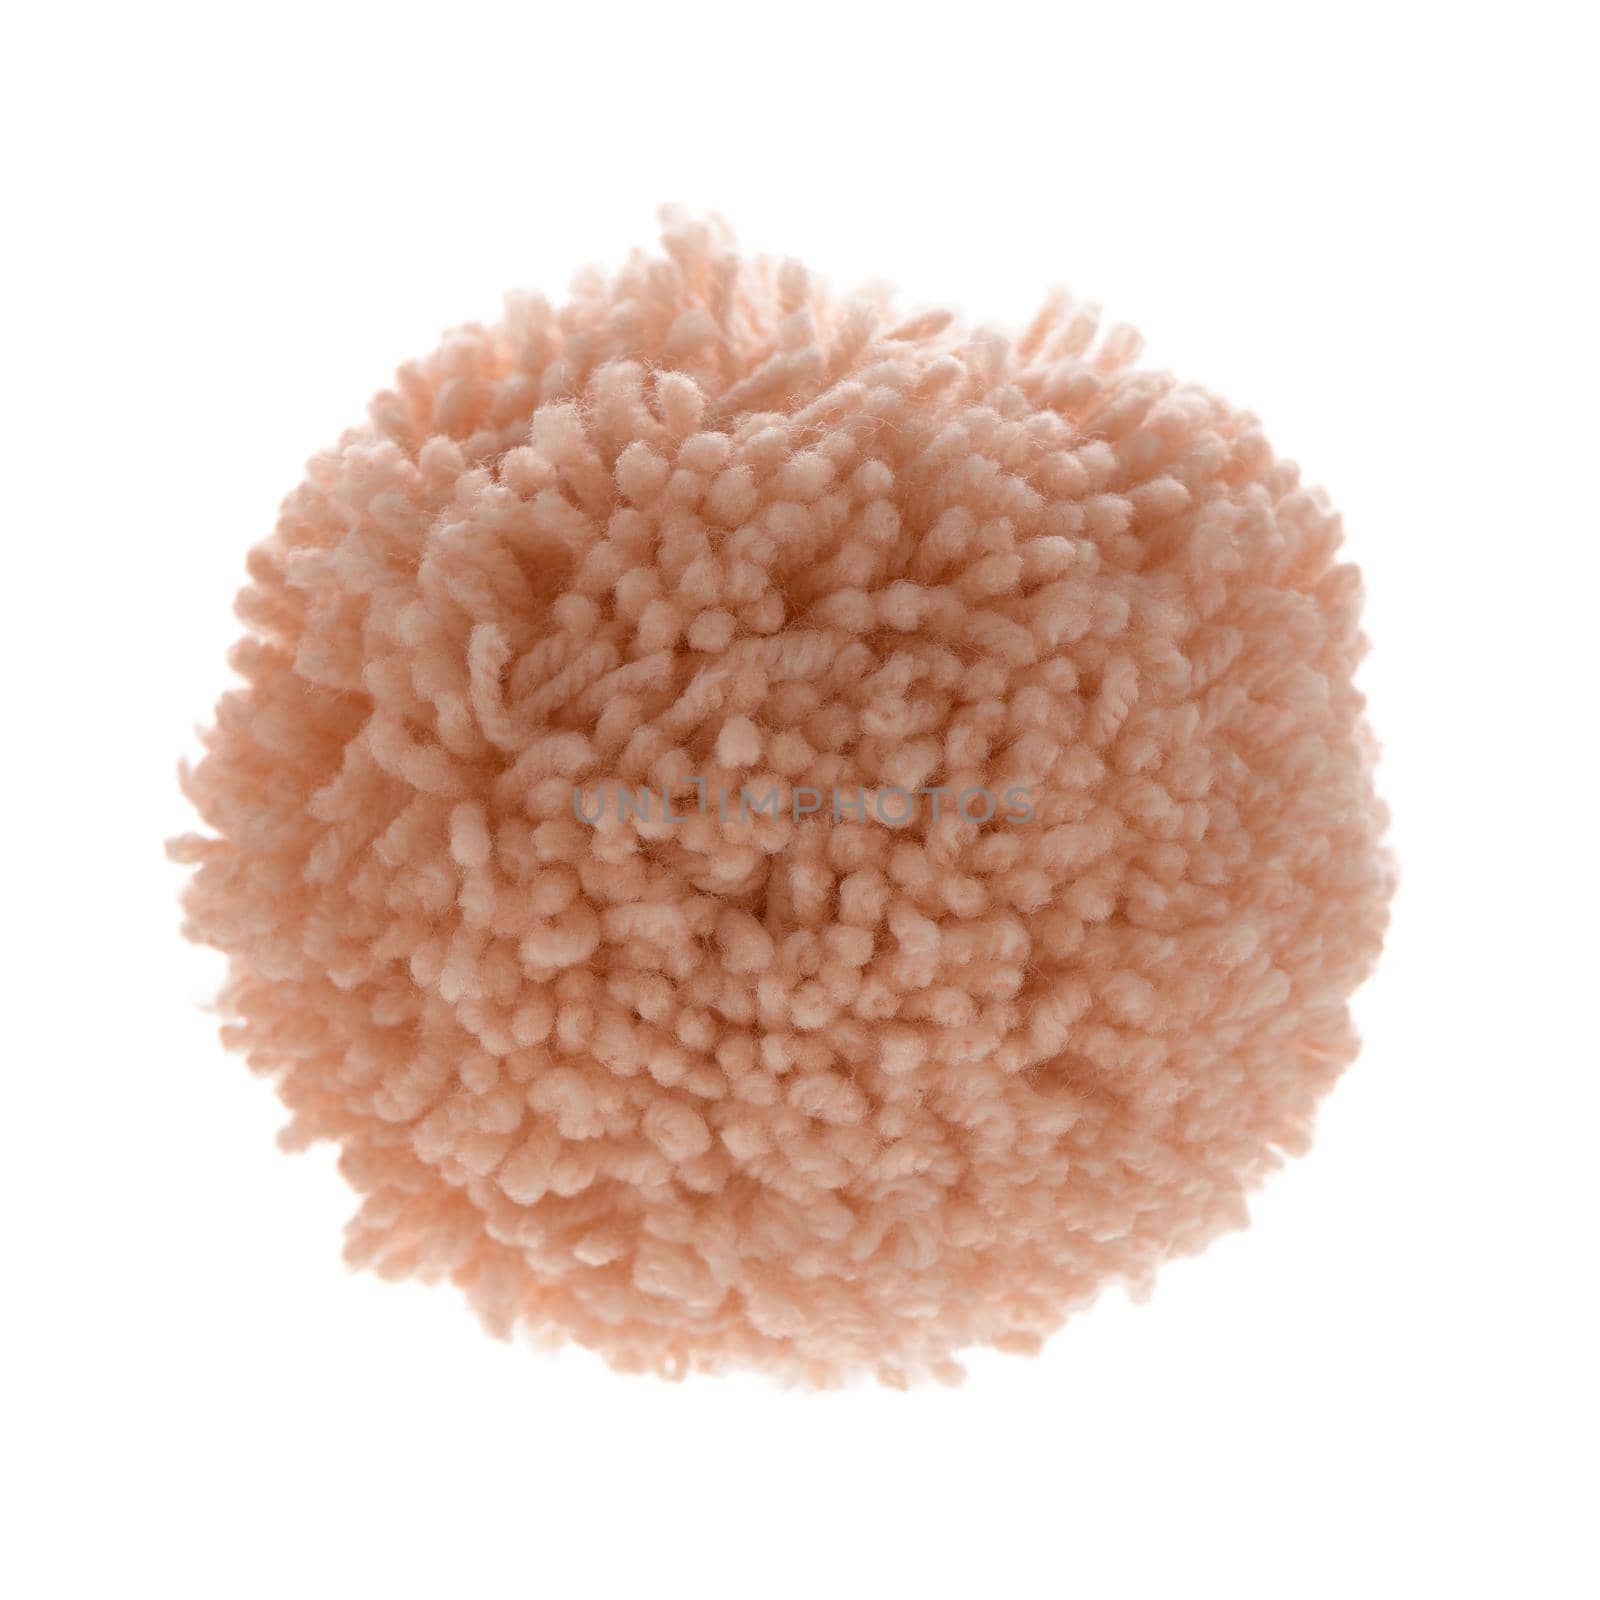 Pink wool pom-pom isolated on white background.